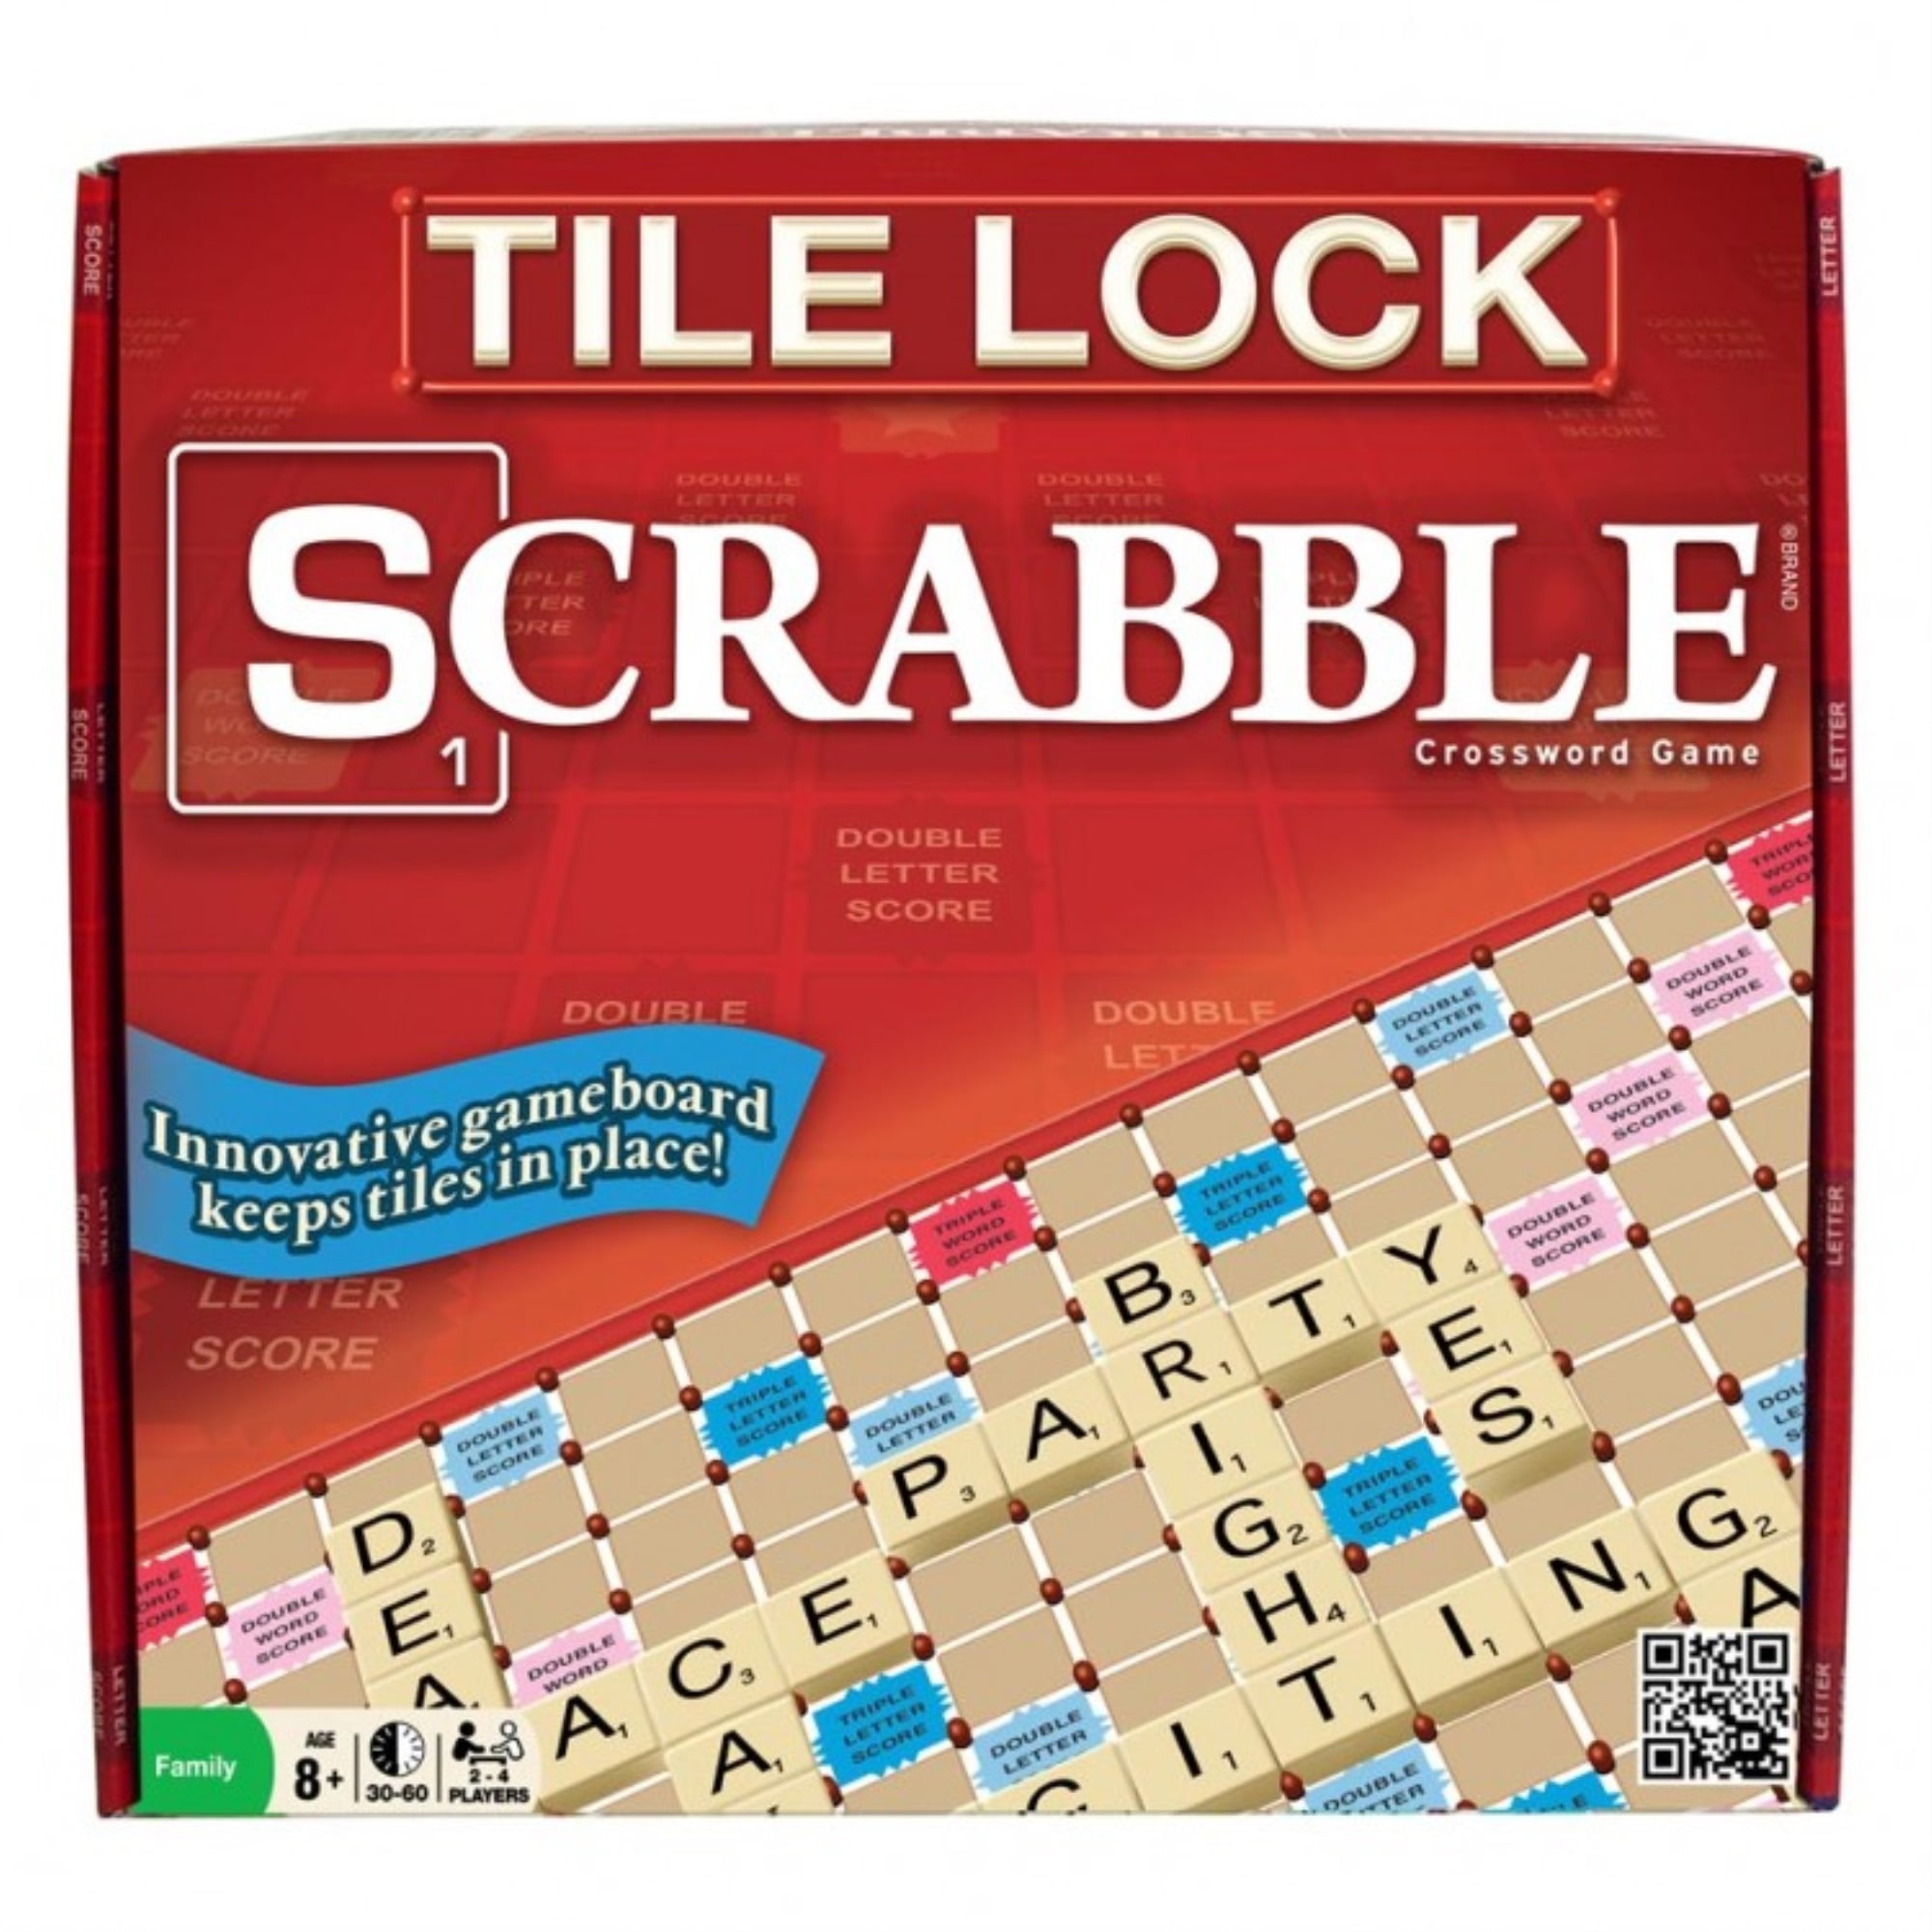 Scrabble Edition Tile Lock Rotating Board Game Winning Moves NEW